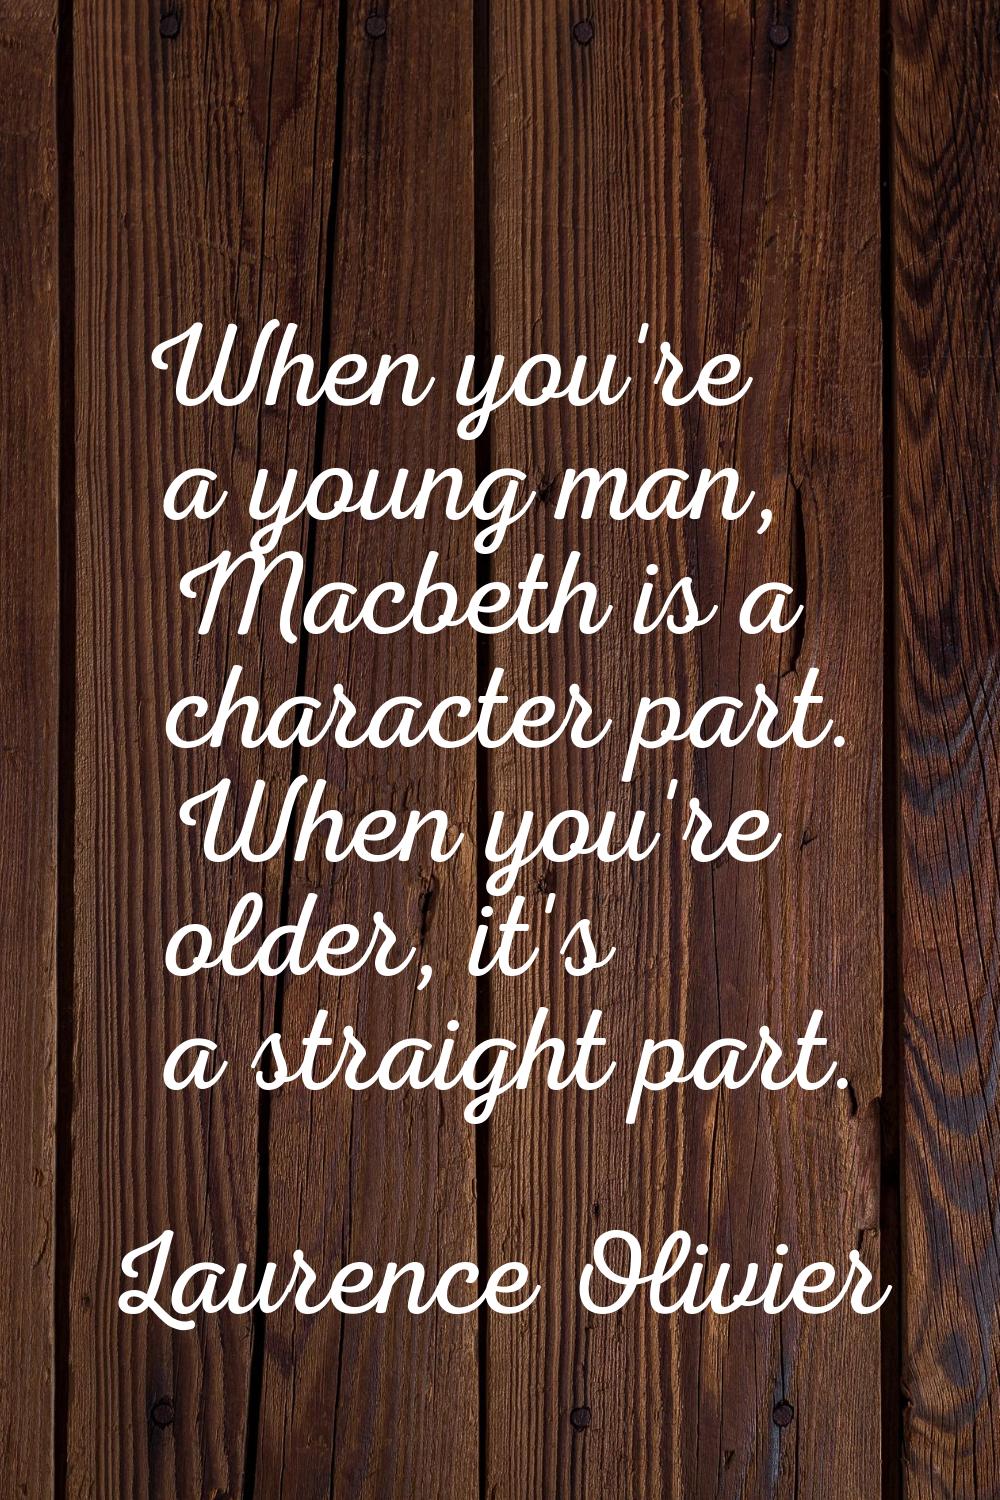 When you're a young man, Macbeth is a character part. When you're older, it's a straight part.